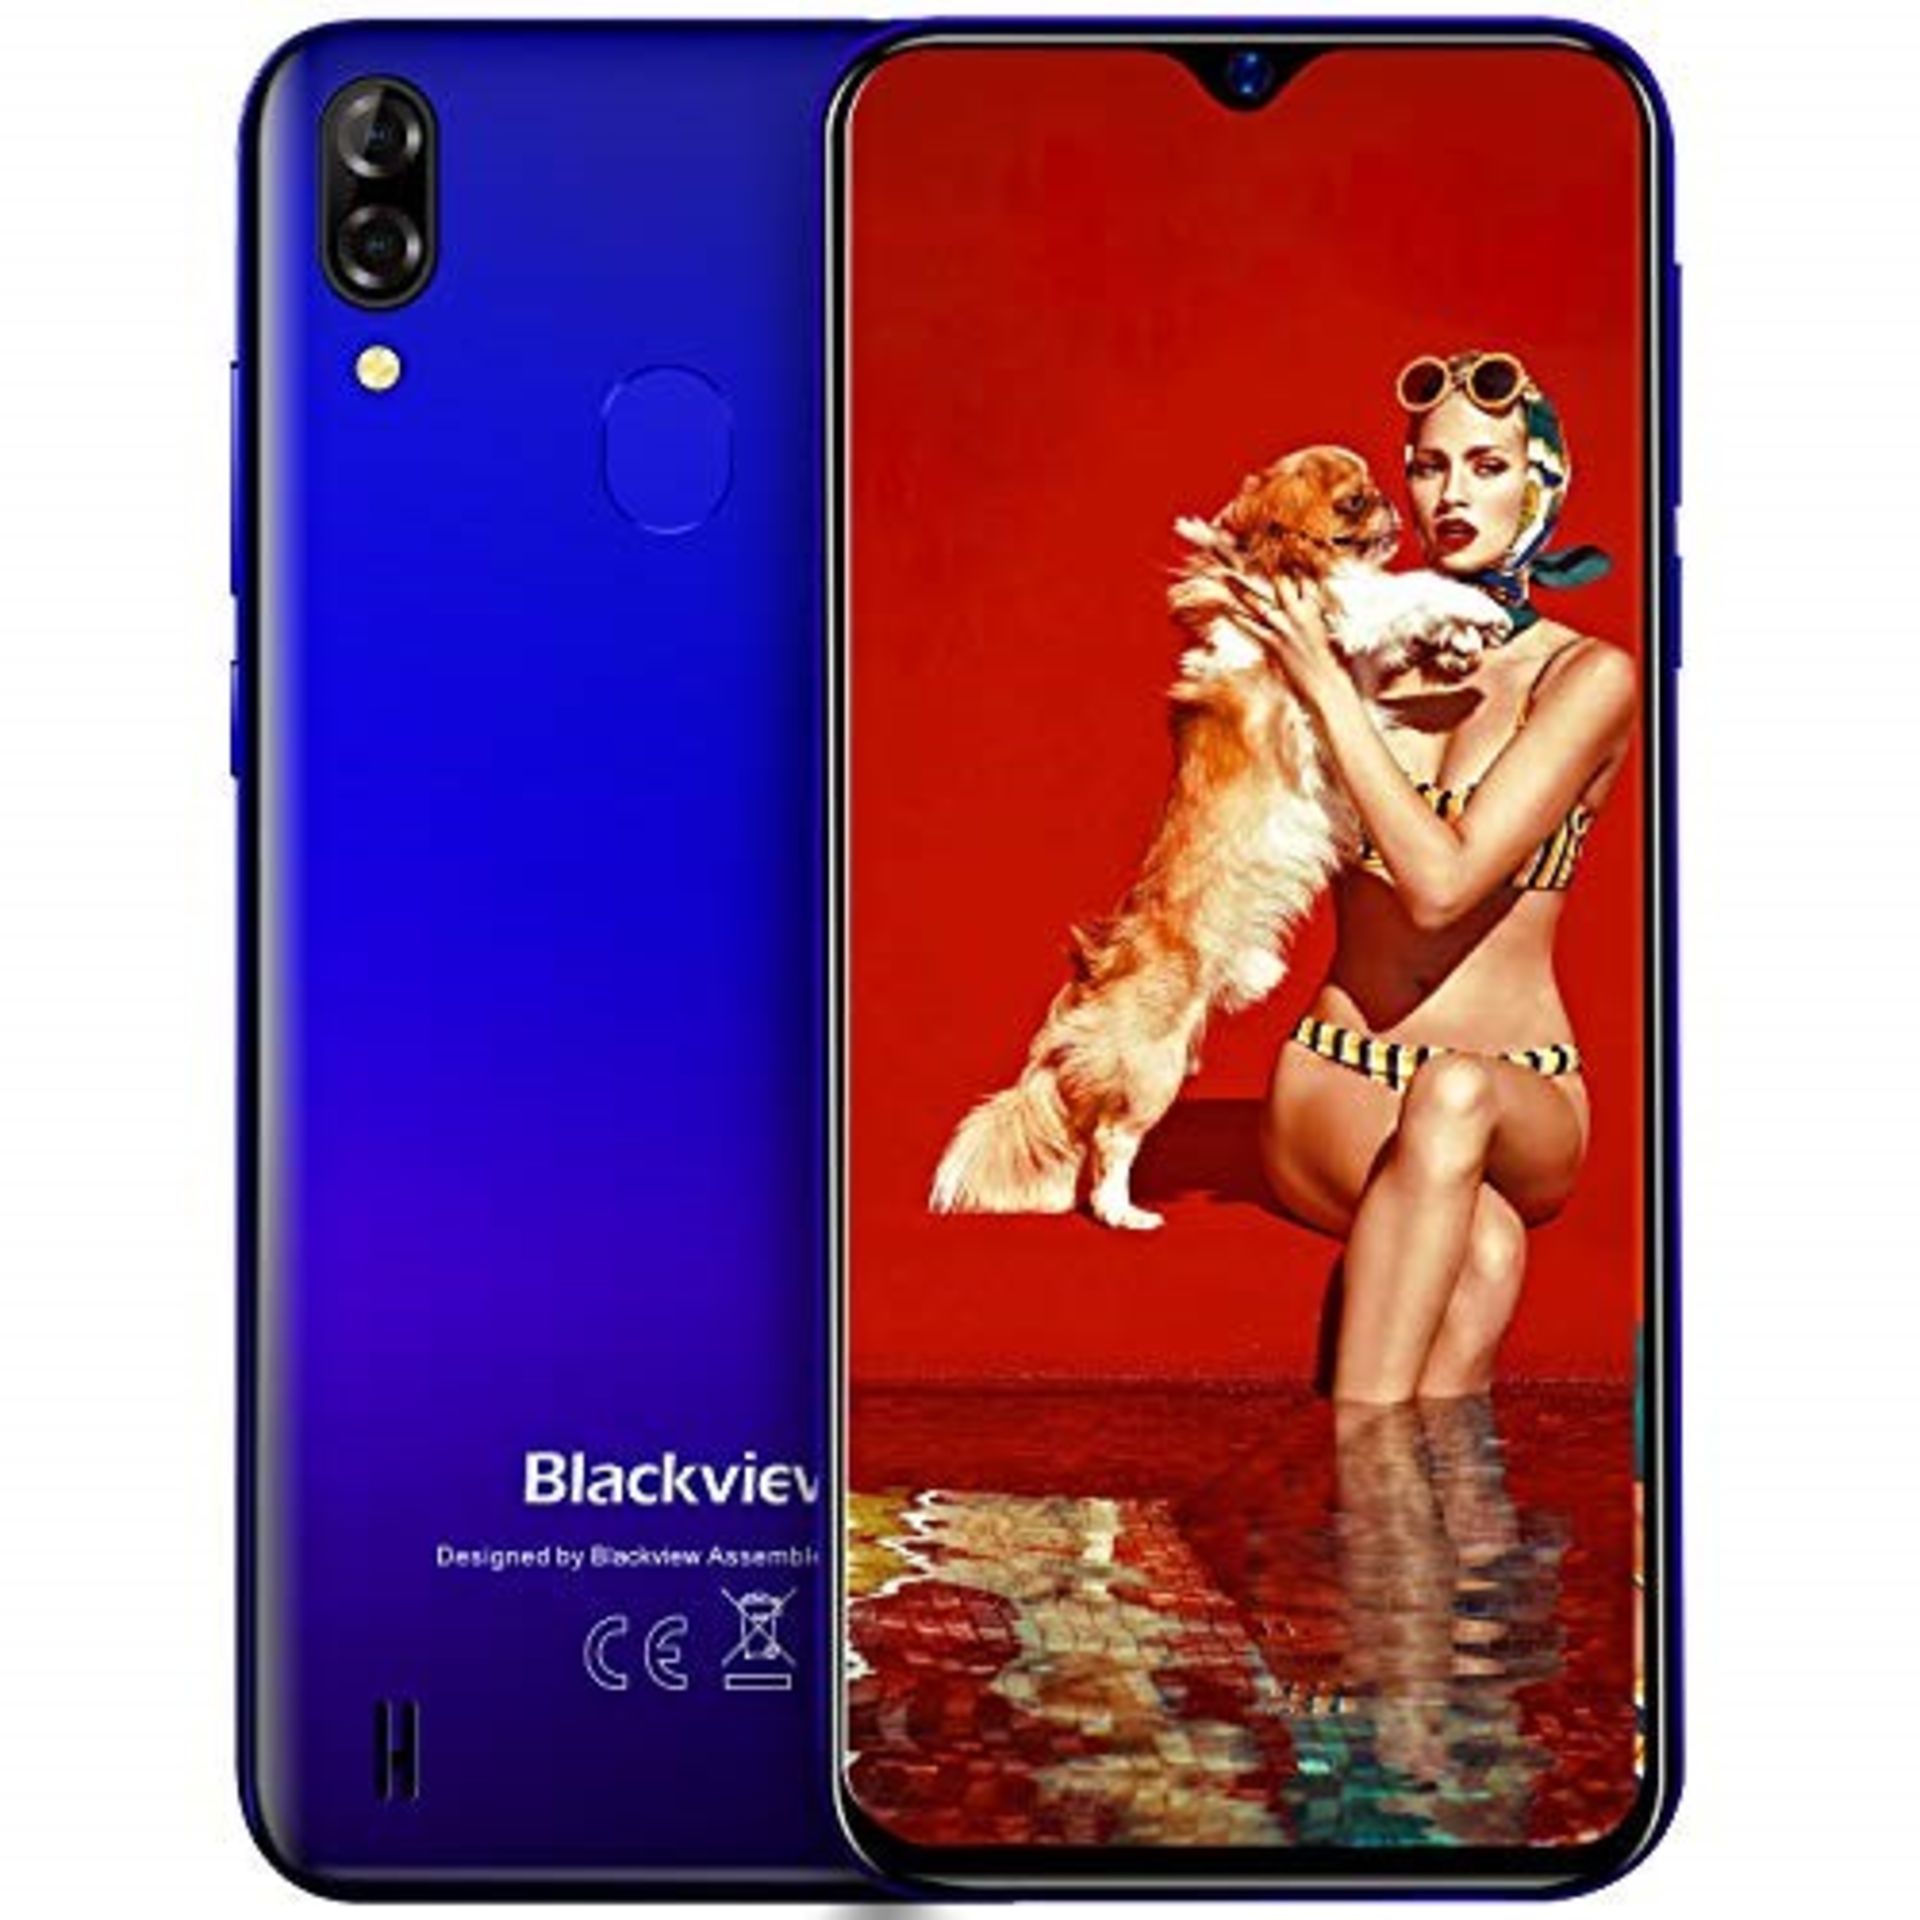 RRP £68.00 4G Mobile Phone, Blakview A60 Pro 3GB RAM+16GB ROM UK Version, Android 9.0, 6.1 Inch W